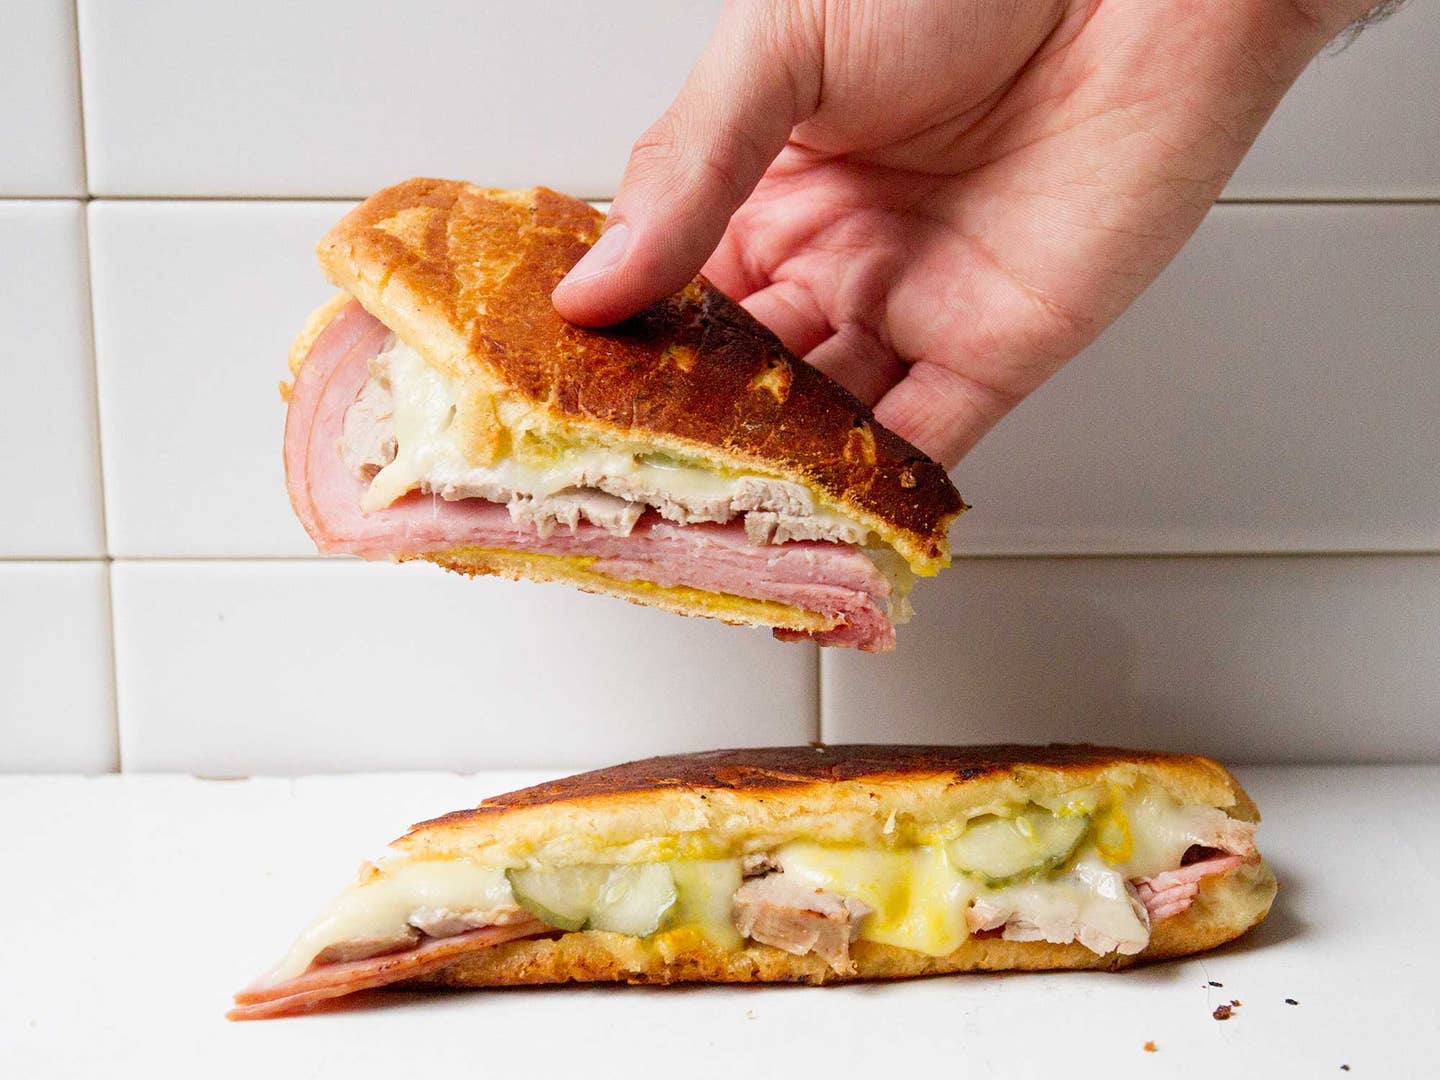 Bring Miami’s Party Sandwich Home for Dinner